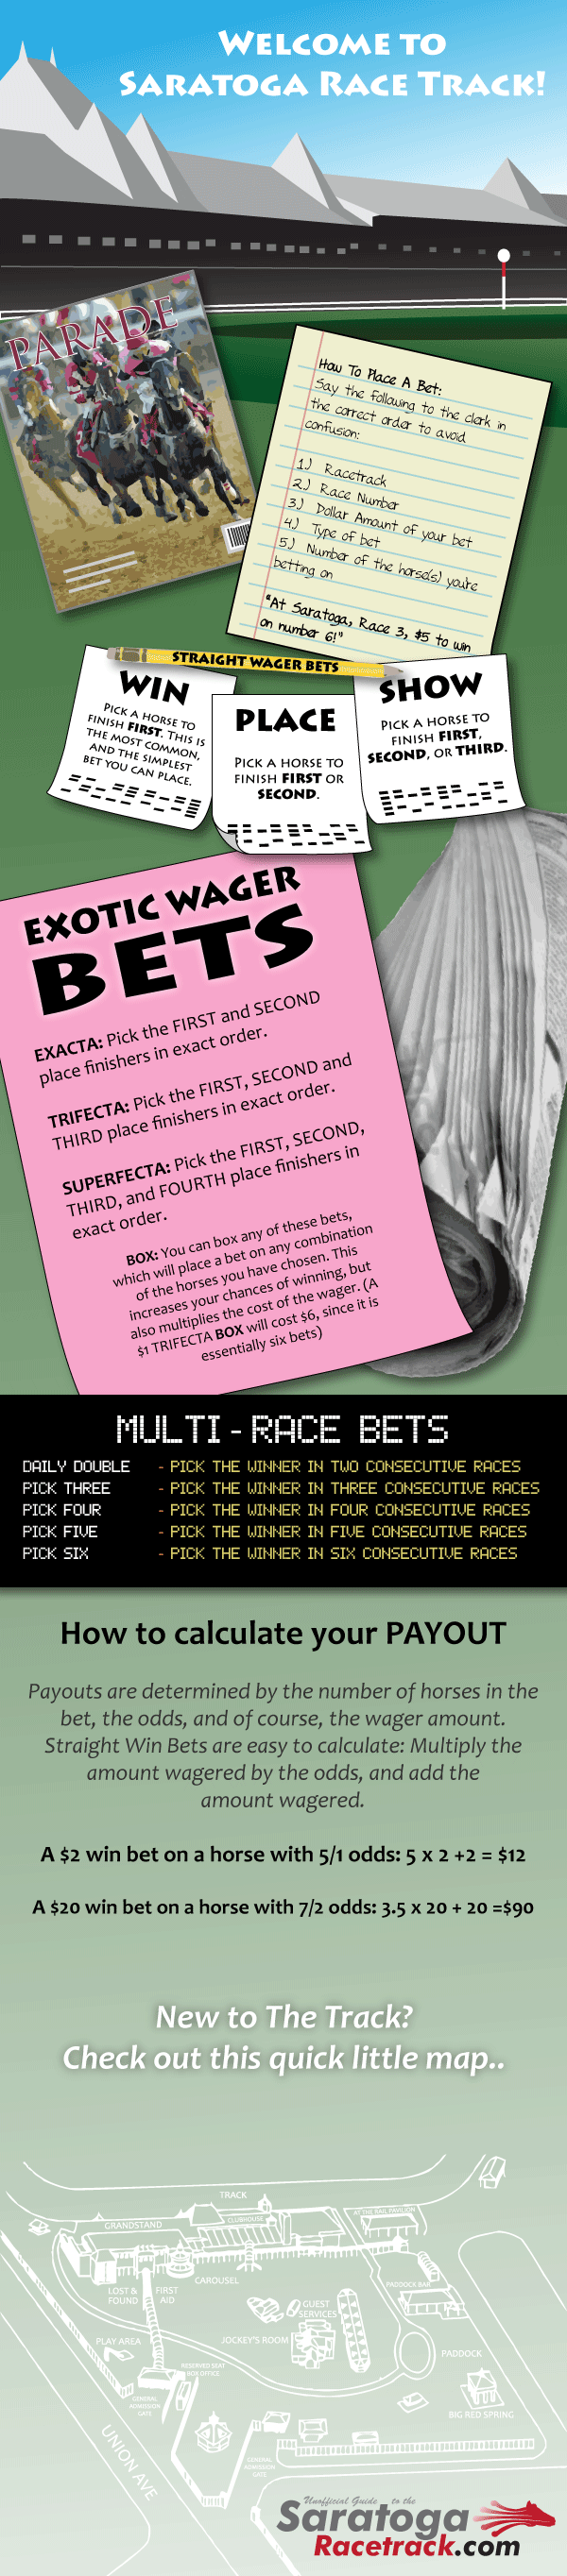 Basic Guide for Online Betting on Car Race Track Events